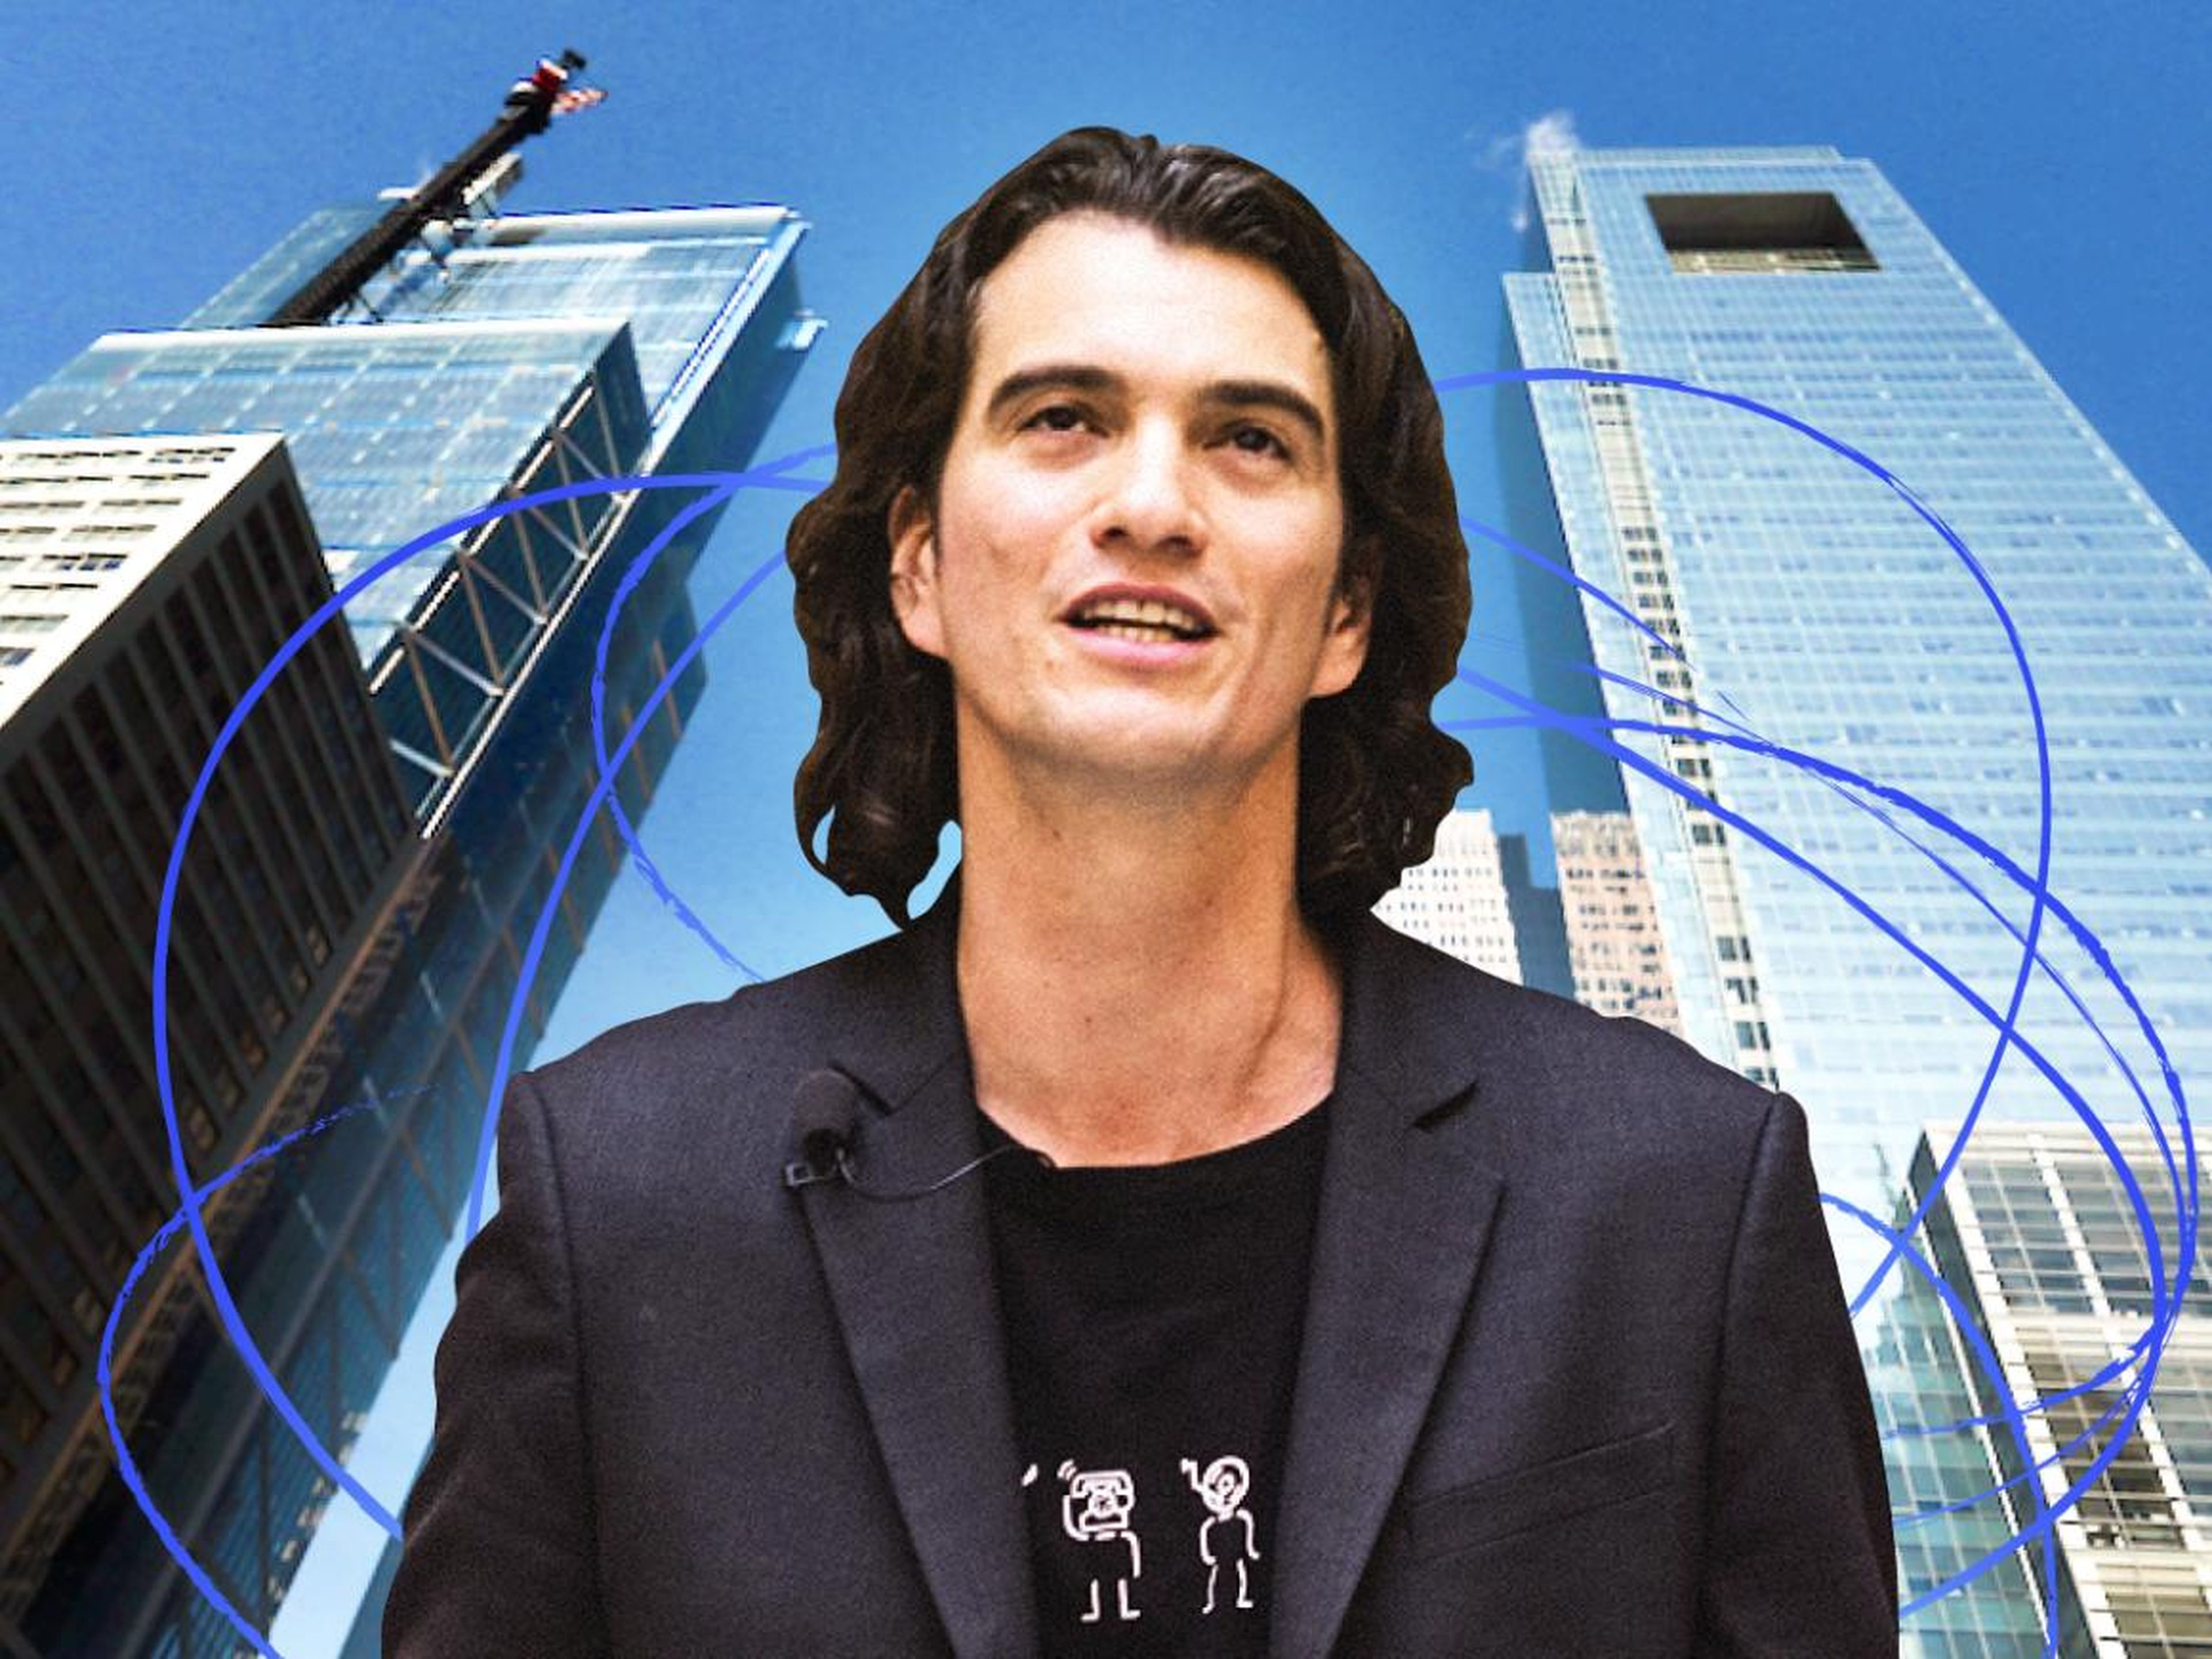 Adam Neumann is stepping down as WeWork's CEO, capping a shocking downfall. WeWork will name two of its execs to run the show while it hunts for a permanent leader.